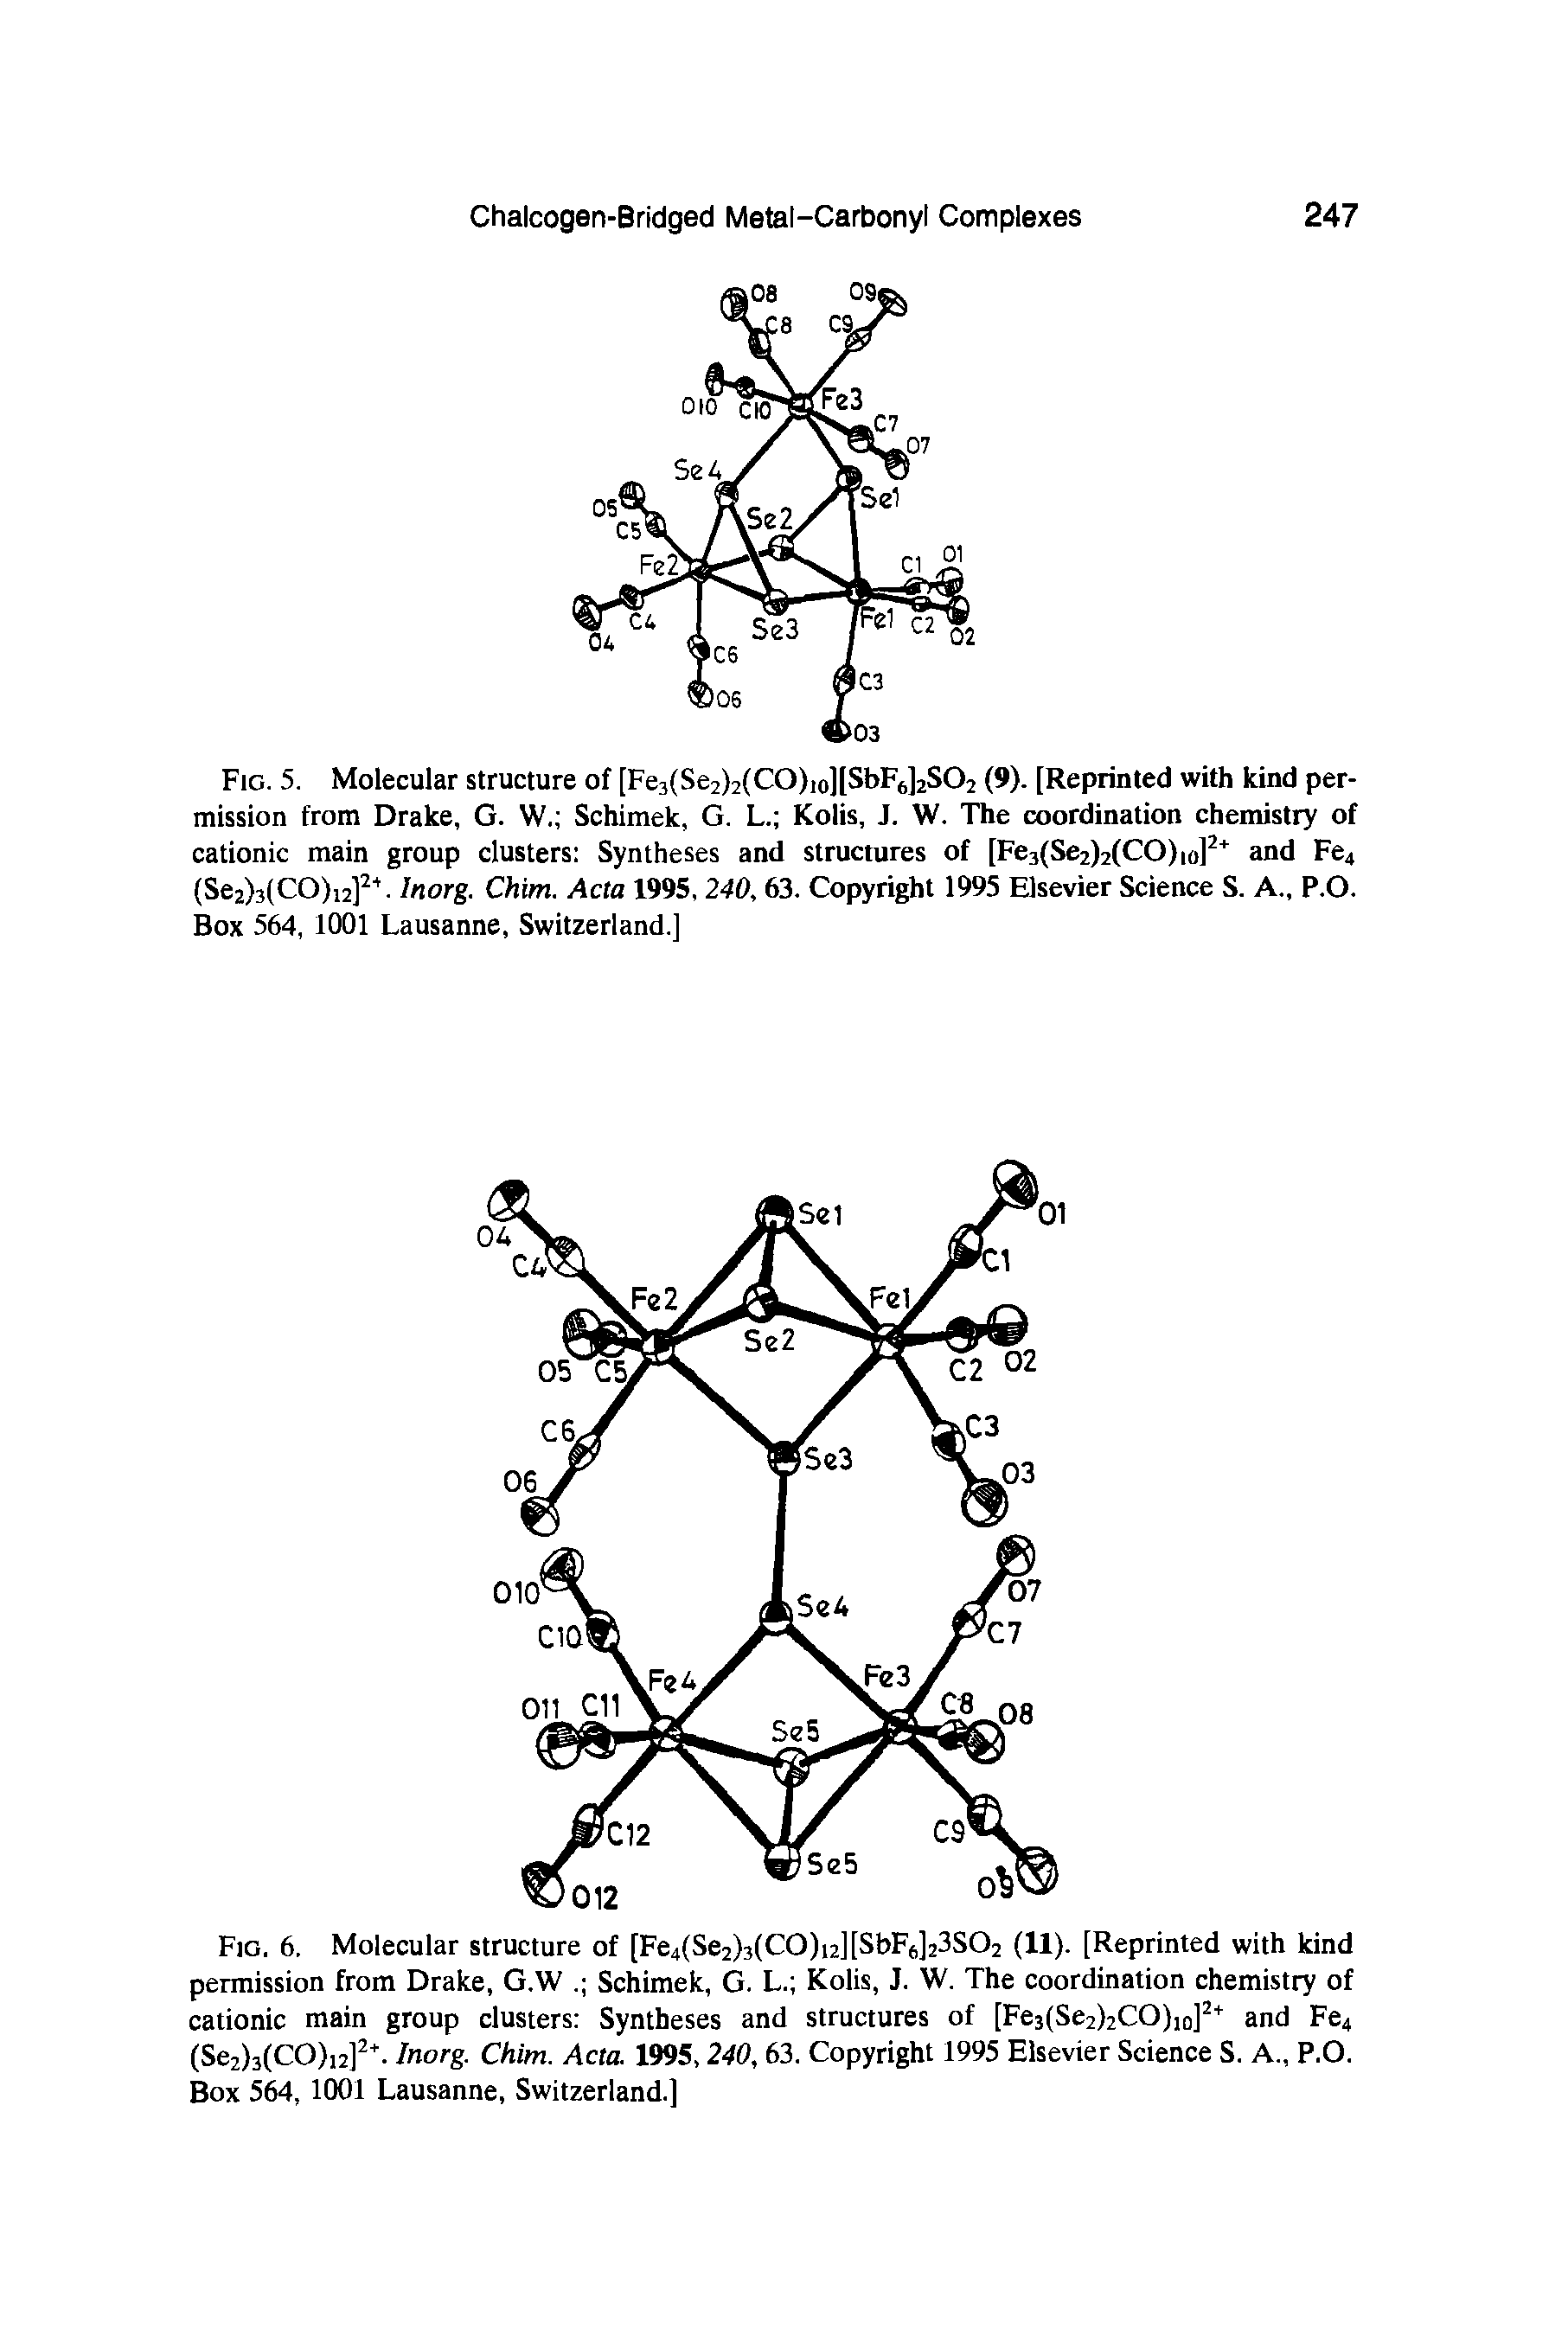 Fig. 5. Molecular structure of [Fe3(Se2)2(CO)io][SbF6]2S02 (9). [Reprinted with kind permission from Drake, G. W. Schimek, G. L. Kolis, J. W. The coordination chemistry of cationic main group clusters Syntheses and structures of [Fe3(Se2)2(CO)io]2+ and Fe4 (Se2)3(CO)i2]2 t. Inorg. Chim. Acta 1995, 240, 63. Copyright 1995 Elsevier Science S. A., P.O. Box 564, 1001 Lausanne, Switzerland.]...